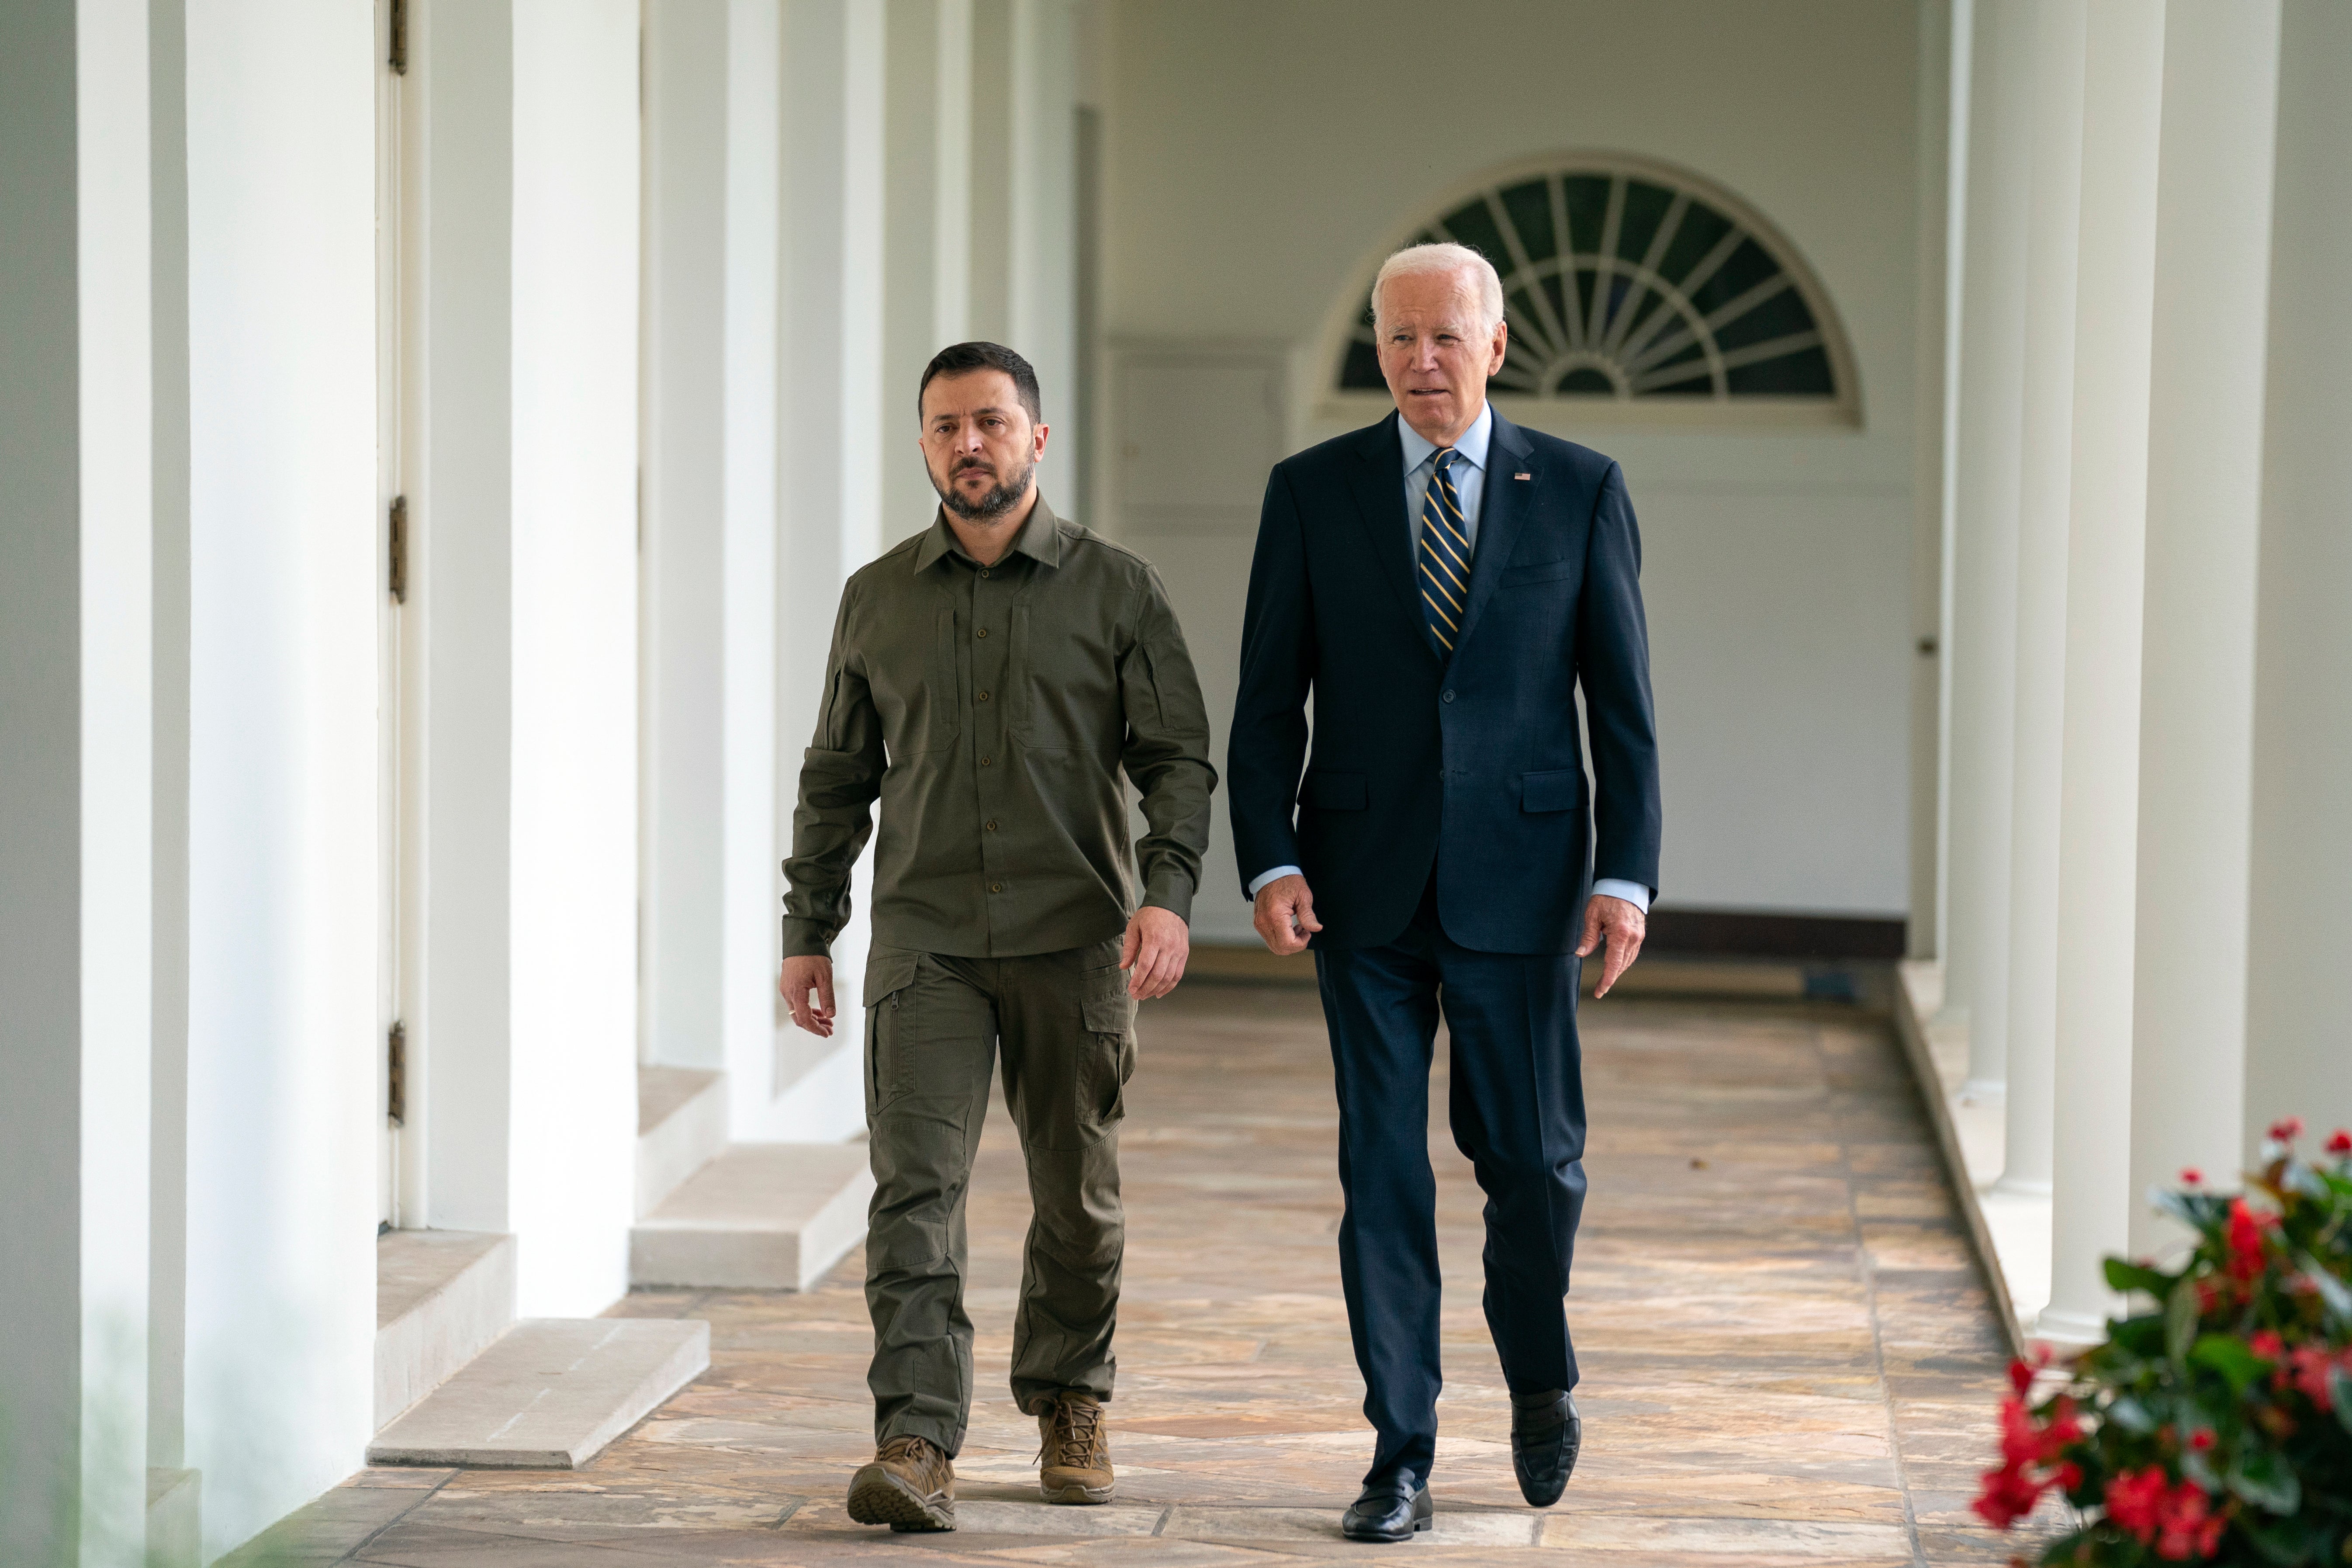 Ukrainian President Volodymyr Zelensky (L) walks with U.S. President Joe Biden down the colonnade to the Oval Office during a visit to the White House September 21, 2023 in Washington, DC.